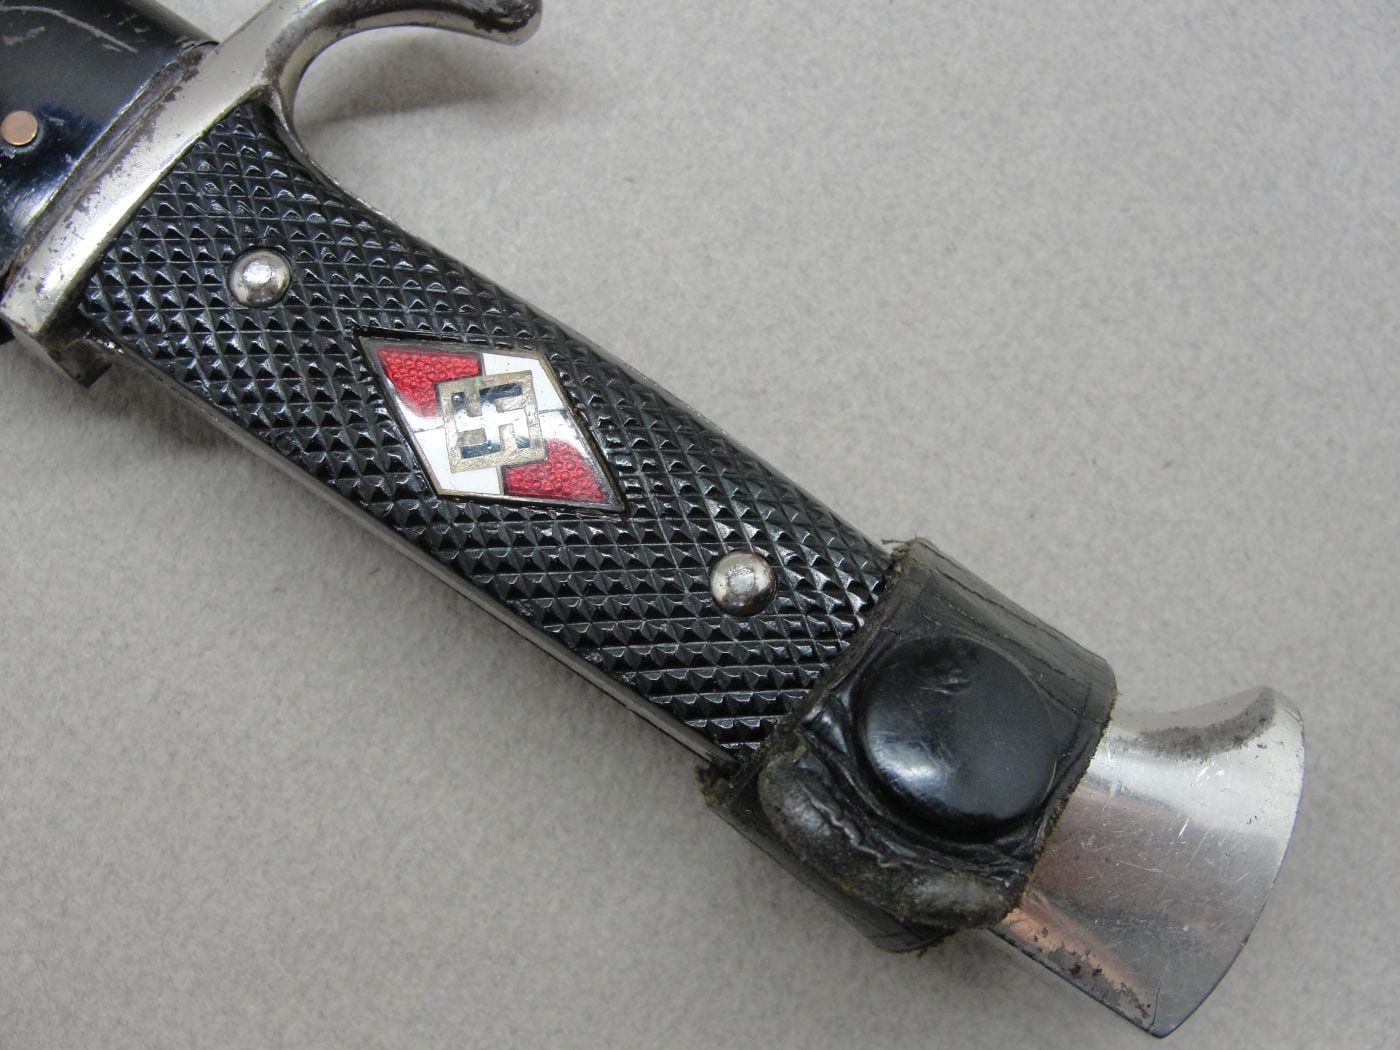 A dagger M 37 for Hitler Youth leaders, with hanger. Maker M7/36, E & F  Hörster, Solingen. Plated blade, the obverse side etched with the motto  Blut und Ehre! (Blood and Honour!).